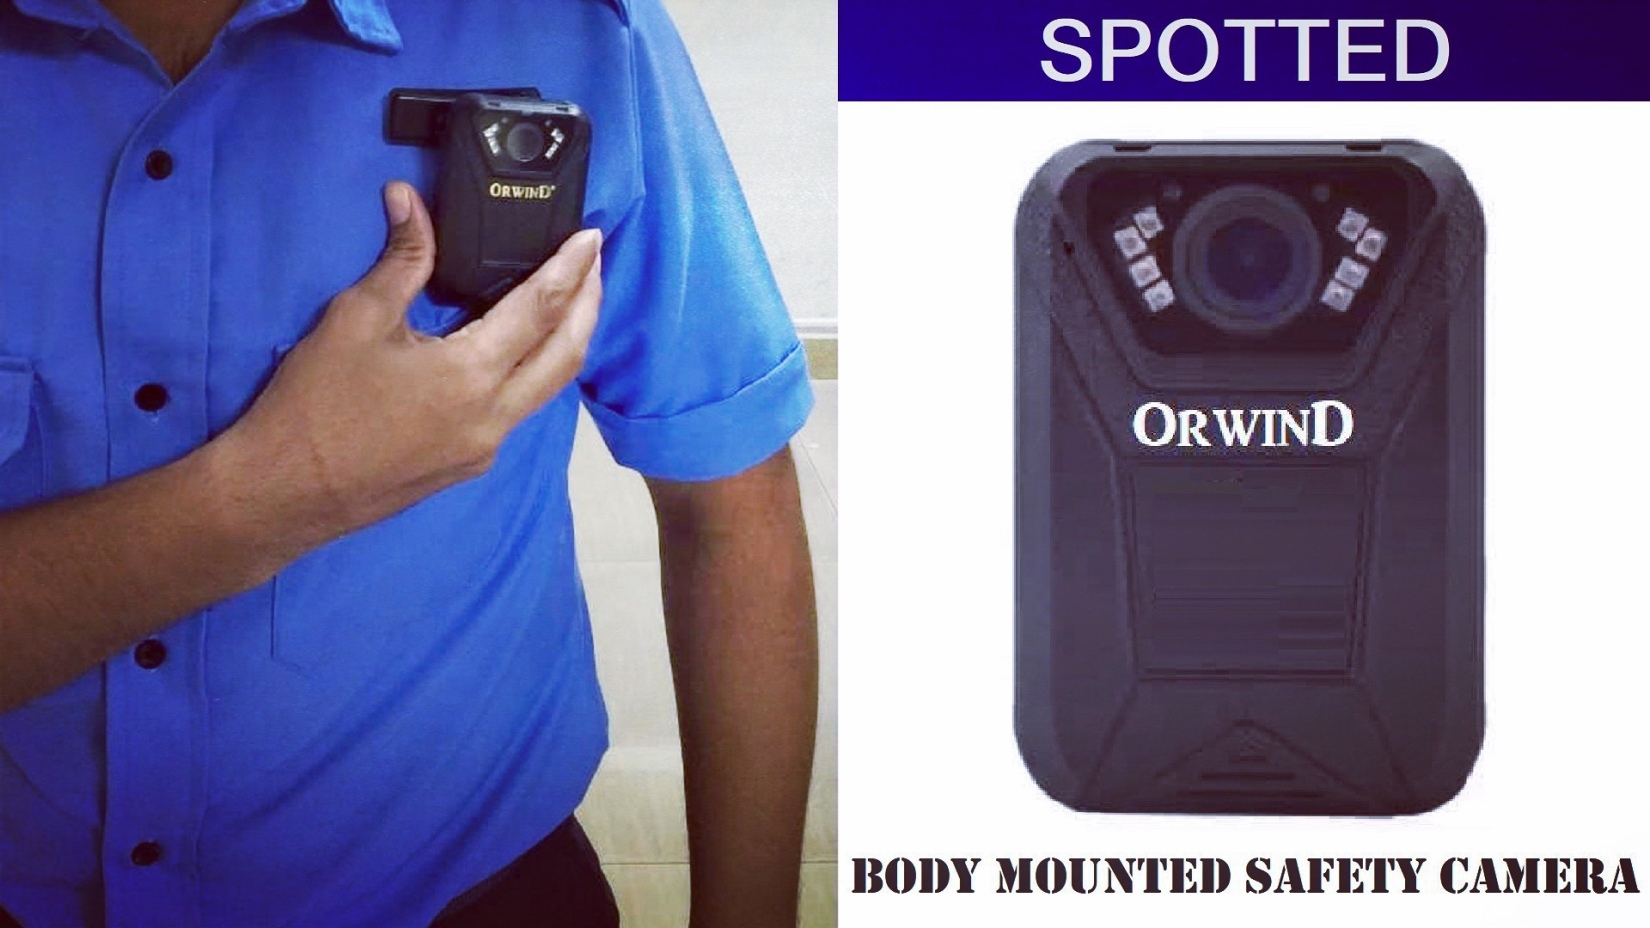 Body Mounted Safety Security Surveillance Portable Camera#Orwind#